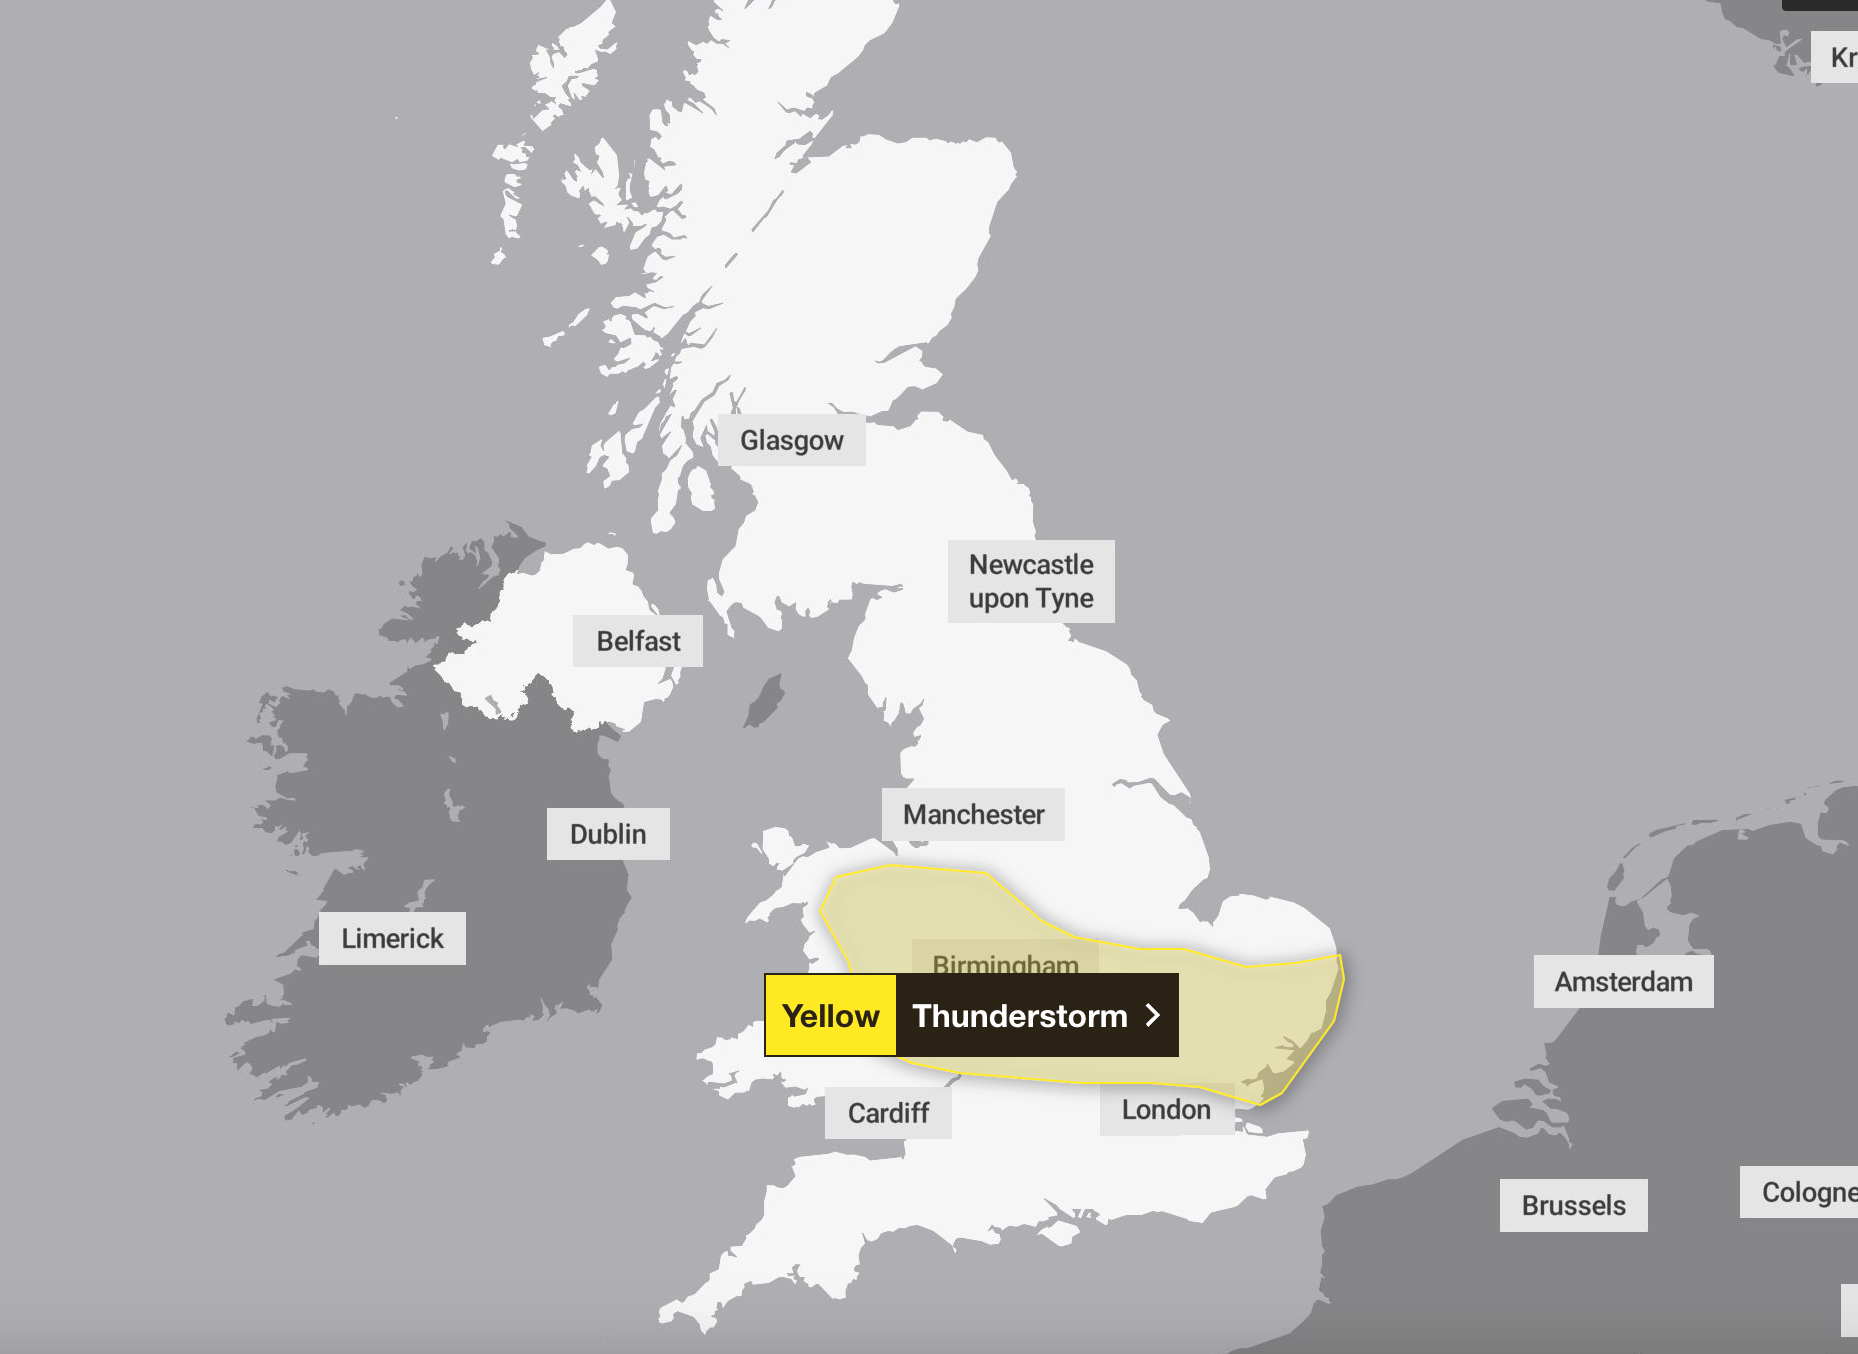 The Met Office issued a 12-hour thunderstorm warning across parts of England and Wales on Thursday